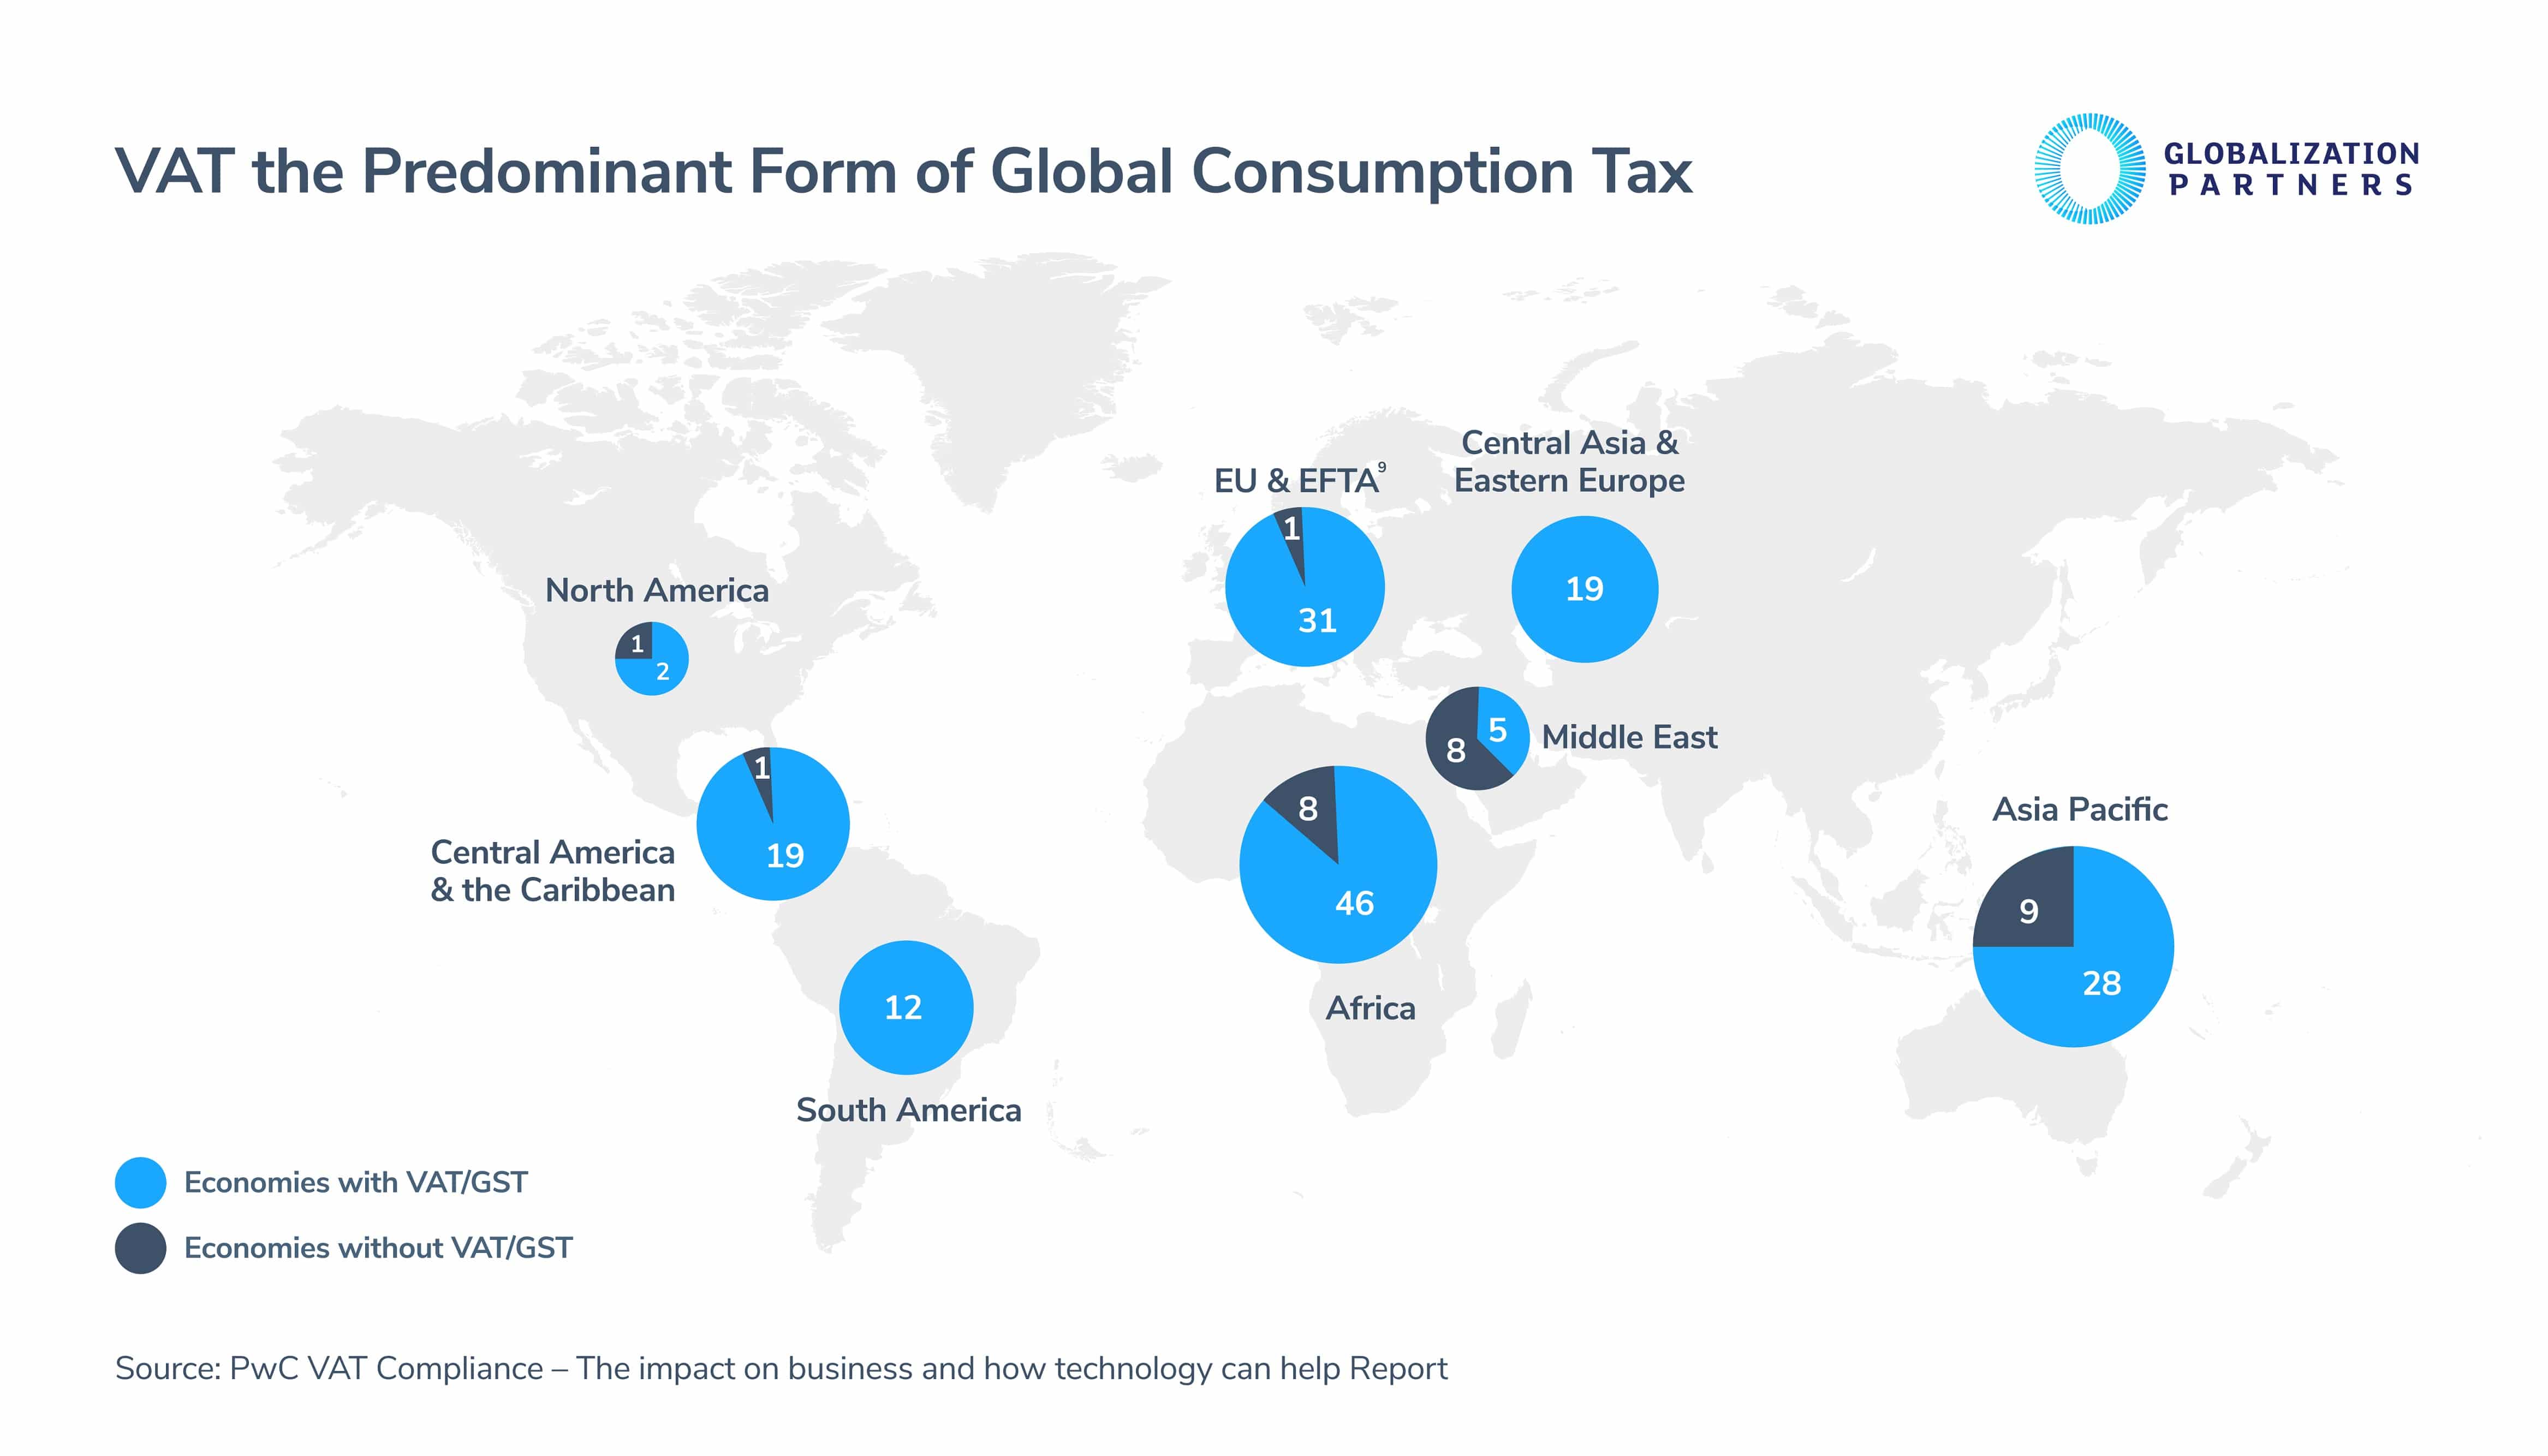 Infographic about VAT, the Predominant Form of Global Consumption Tax 